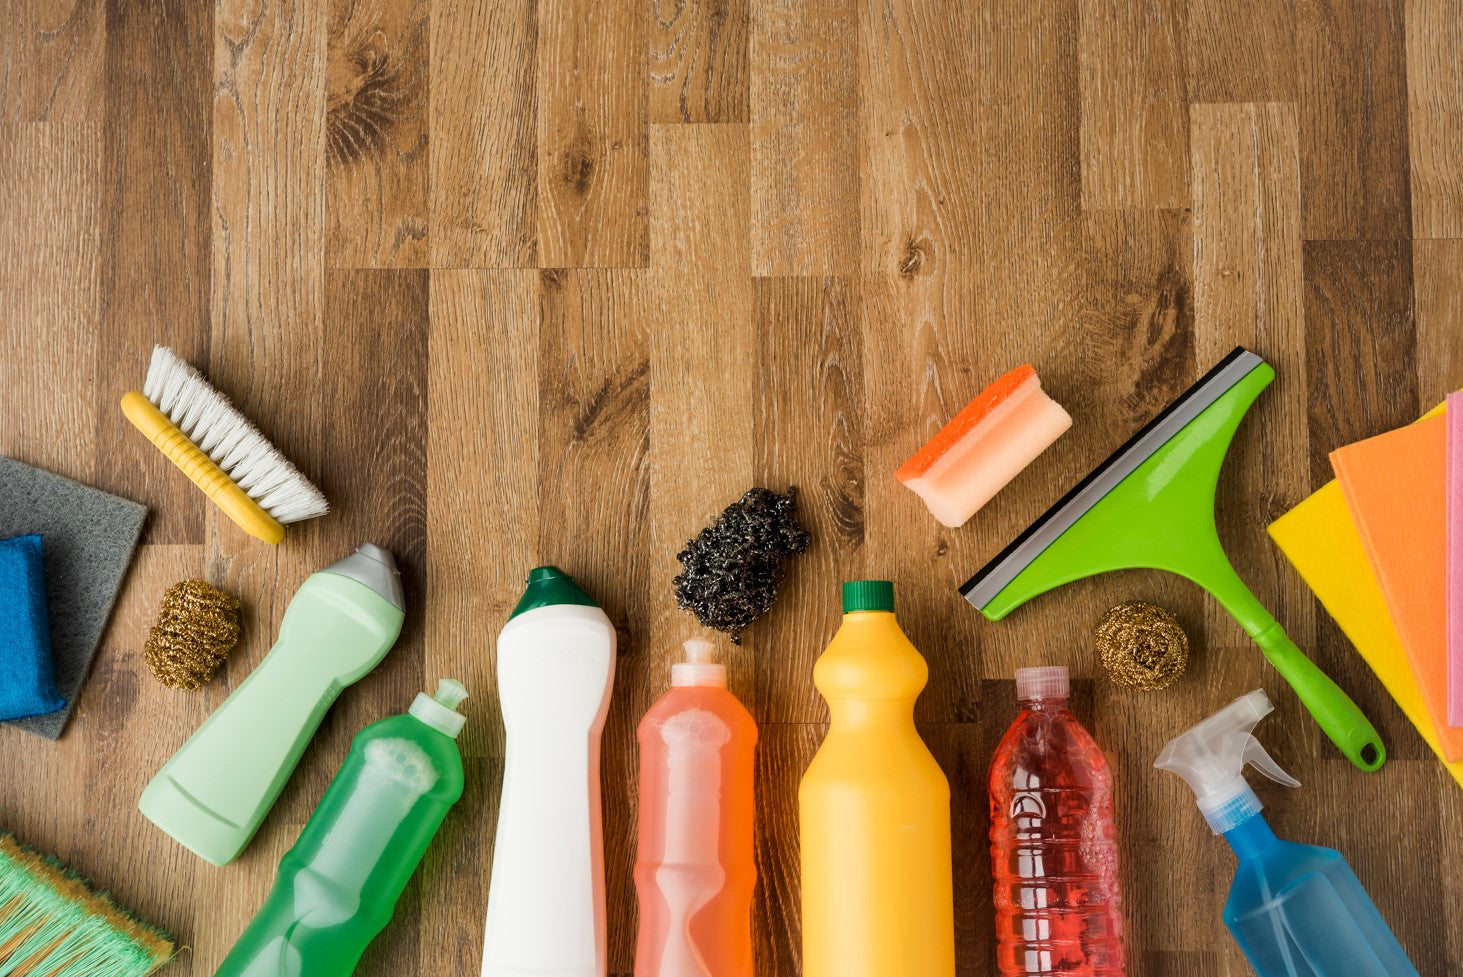 How to Choose the Right Cleaning Chemicals for Every Surface?